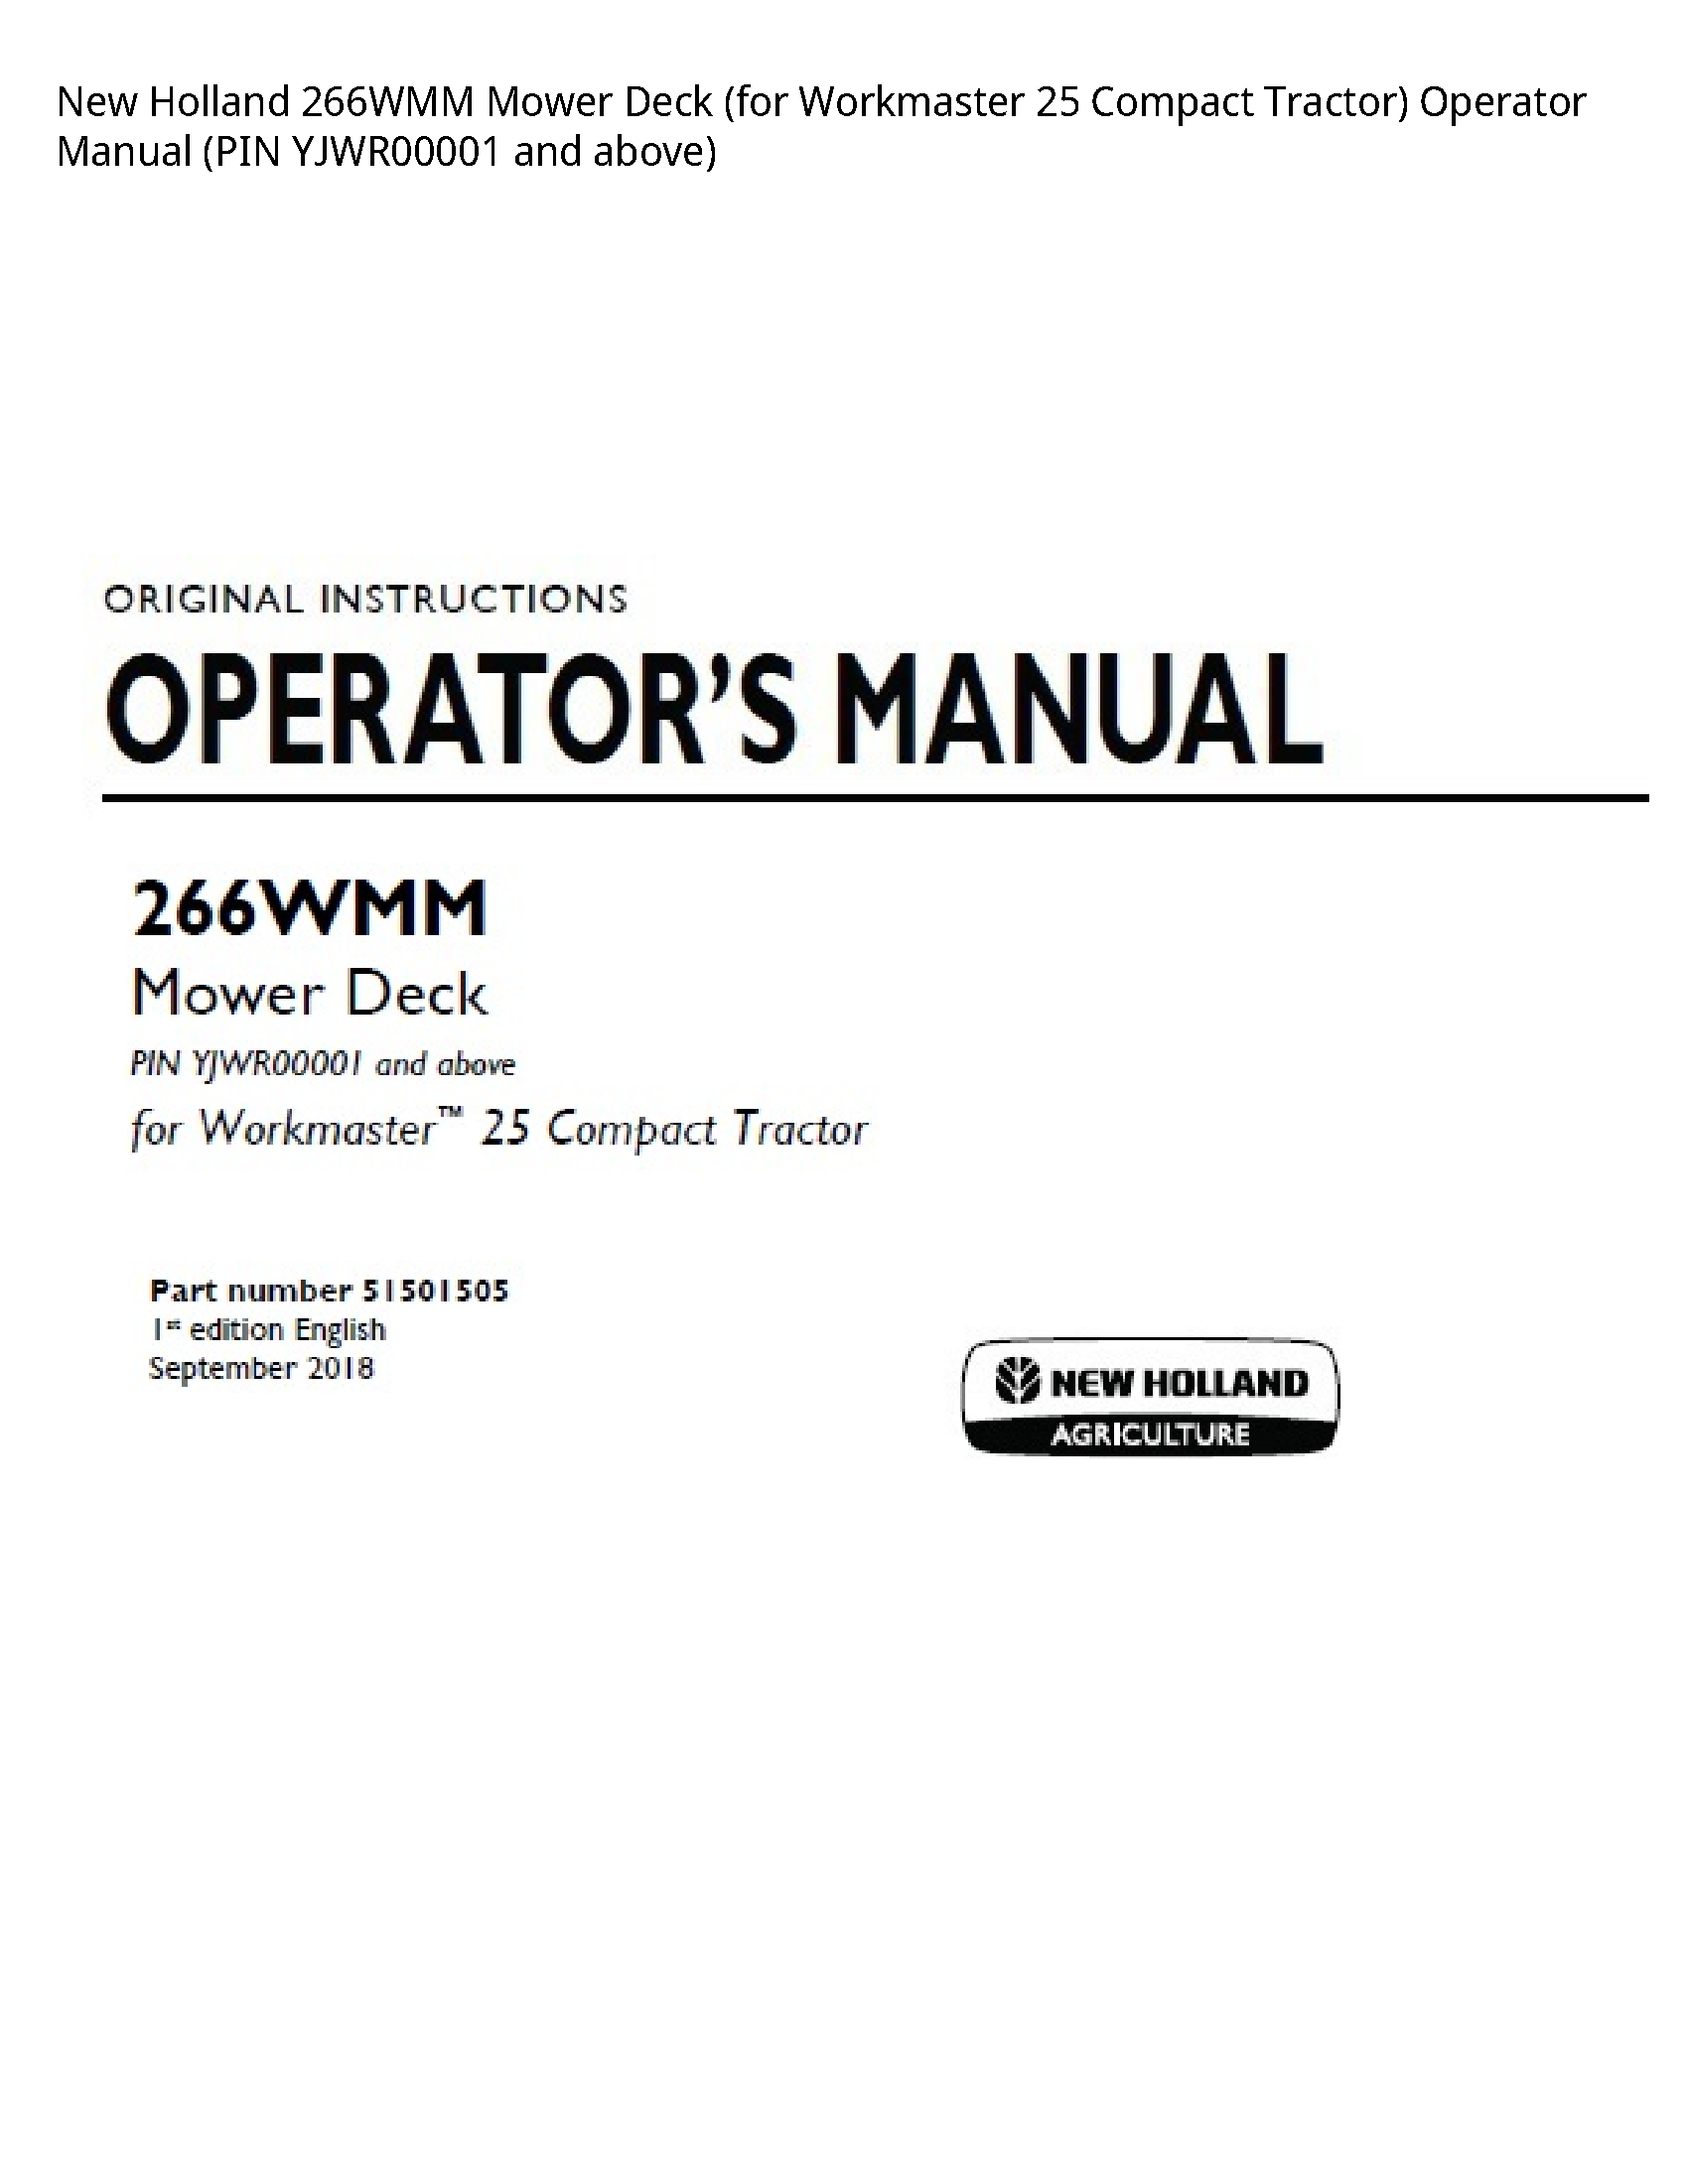 New Holland 266WMM Mower Deck (for Workmaster Compact Tractor) Operator manual